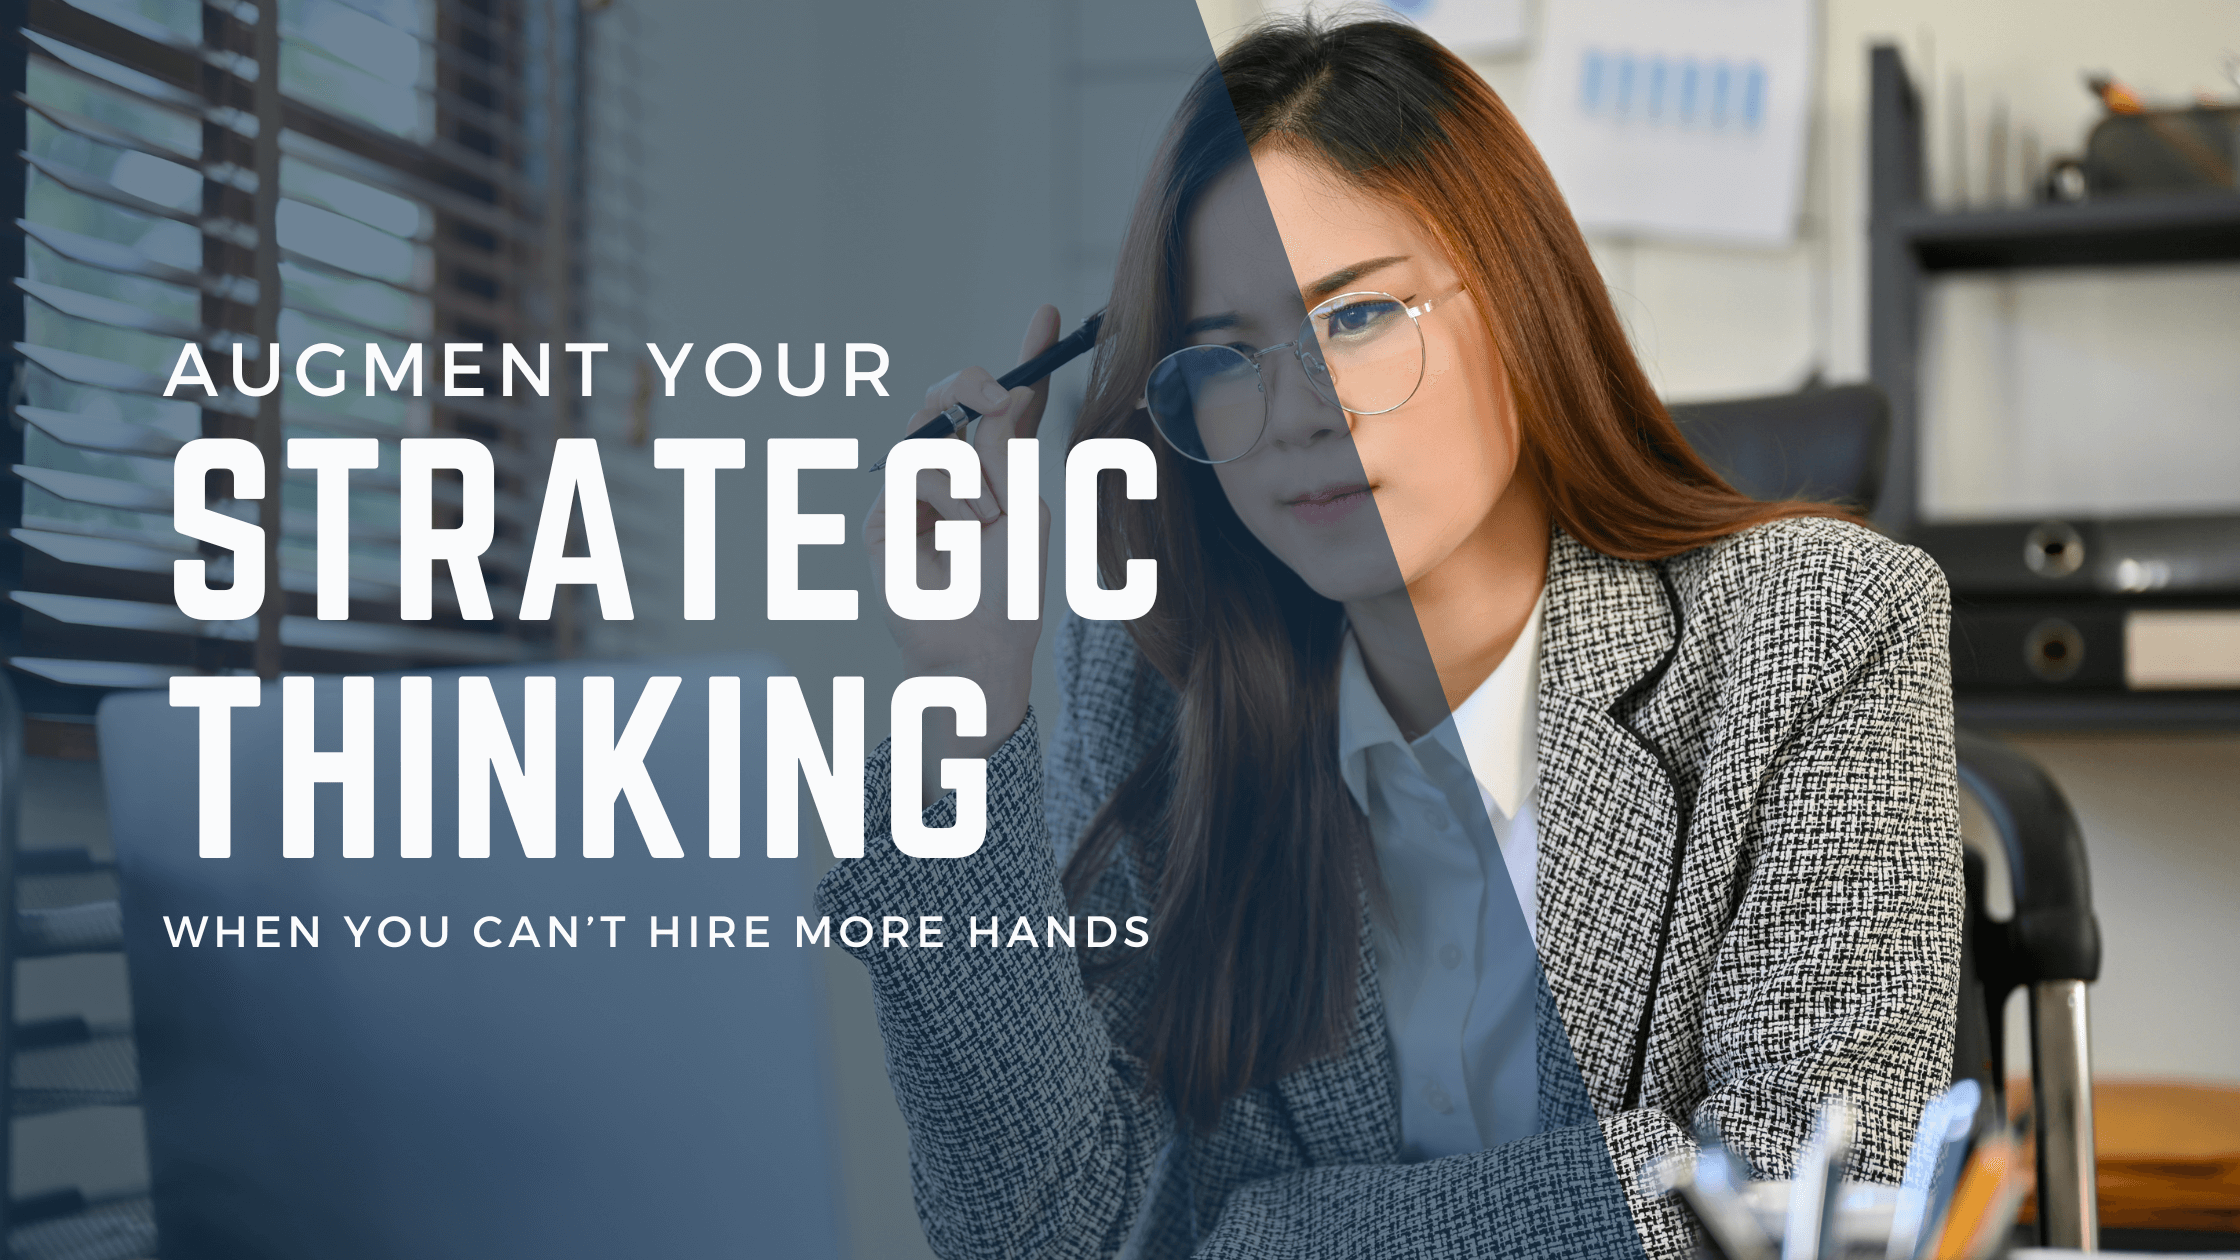 Augment your strategic thinking when you can't hire more hands